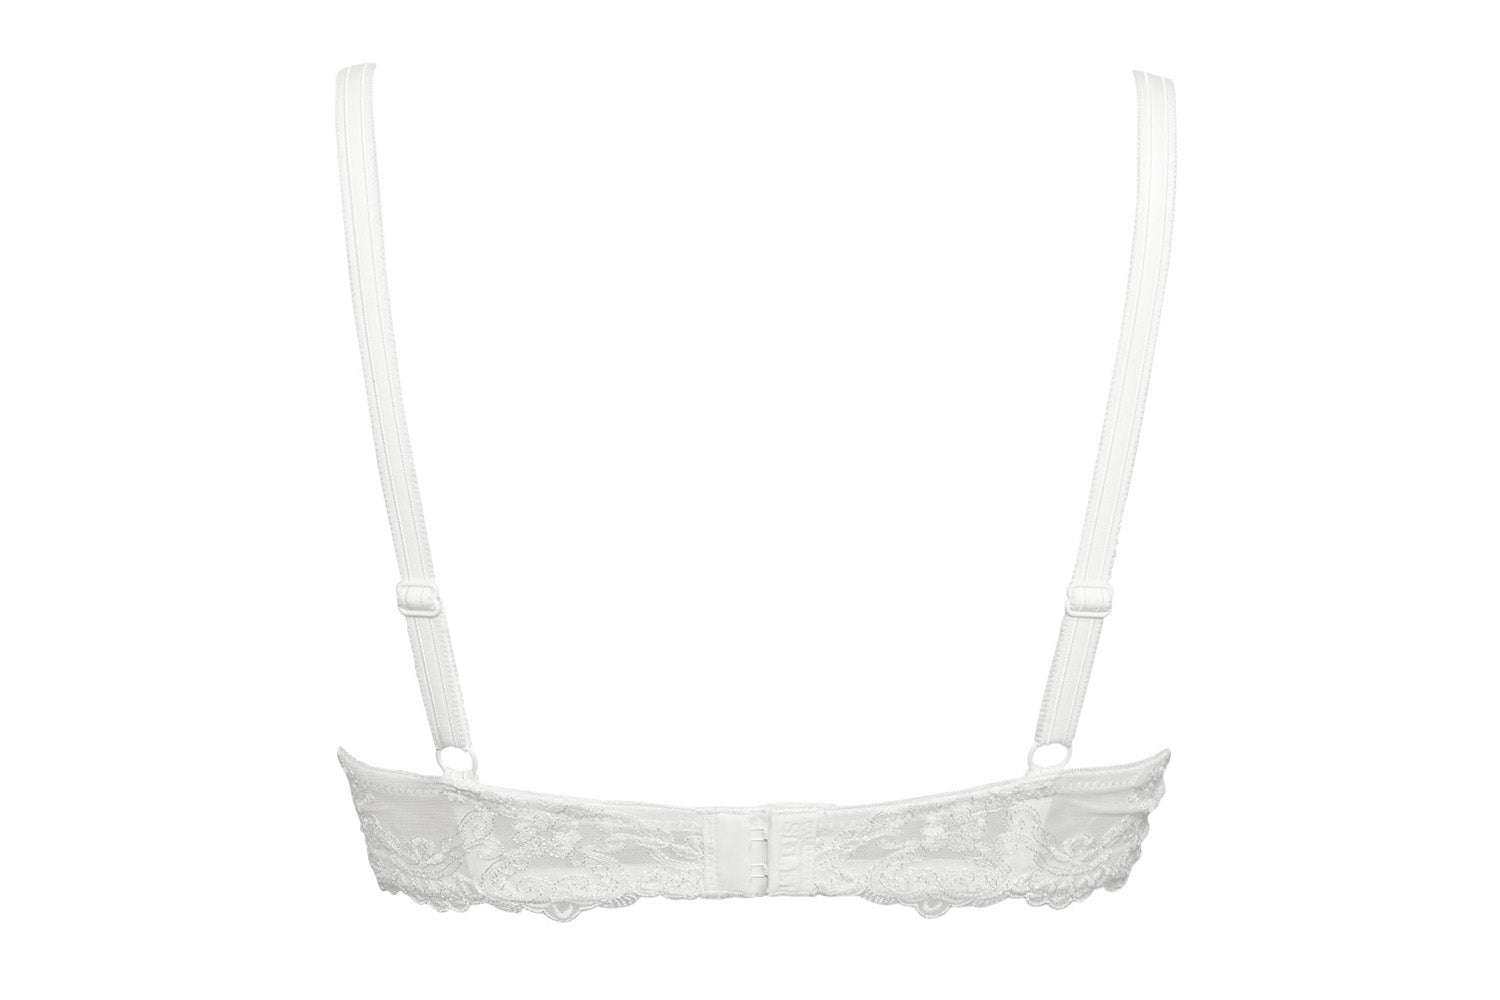 Lycra Push-Up Bra in Off-White with Embroidered Tulle